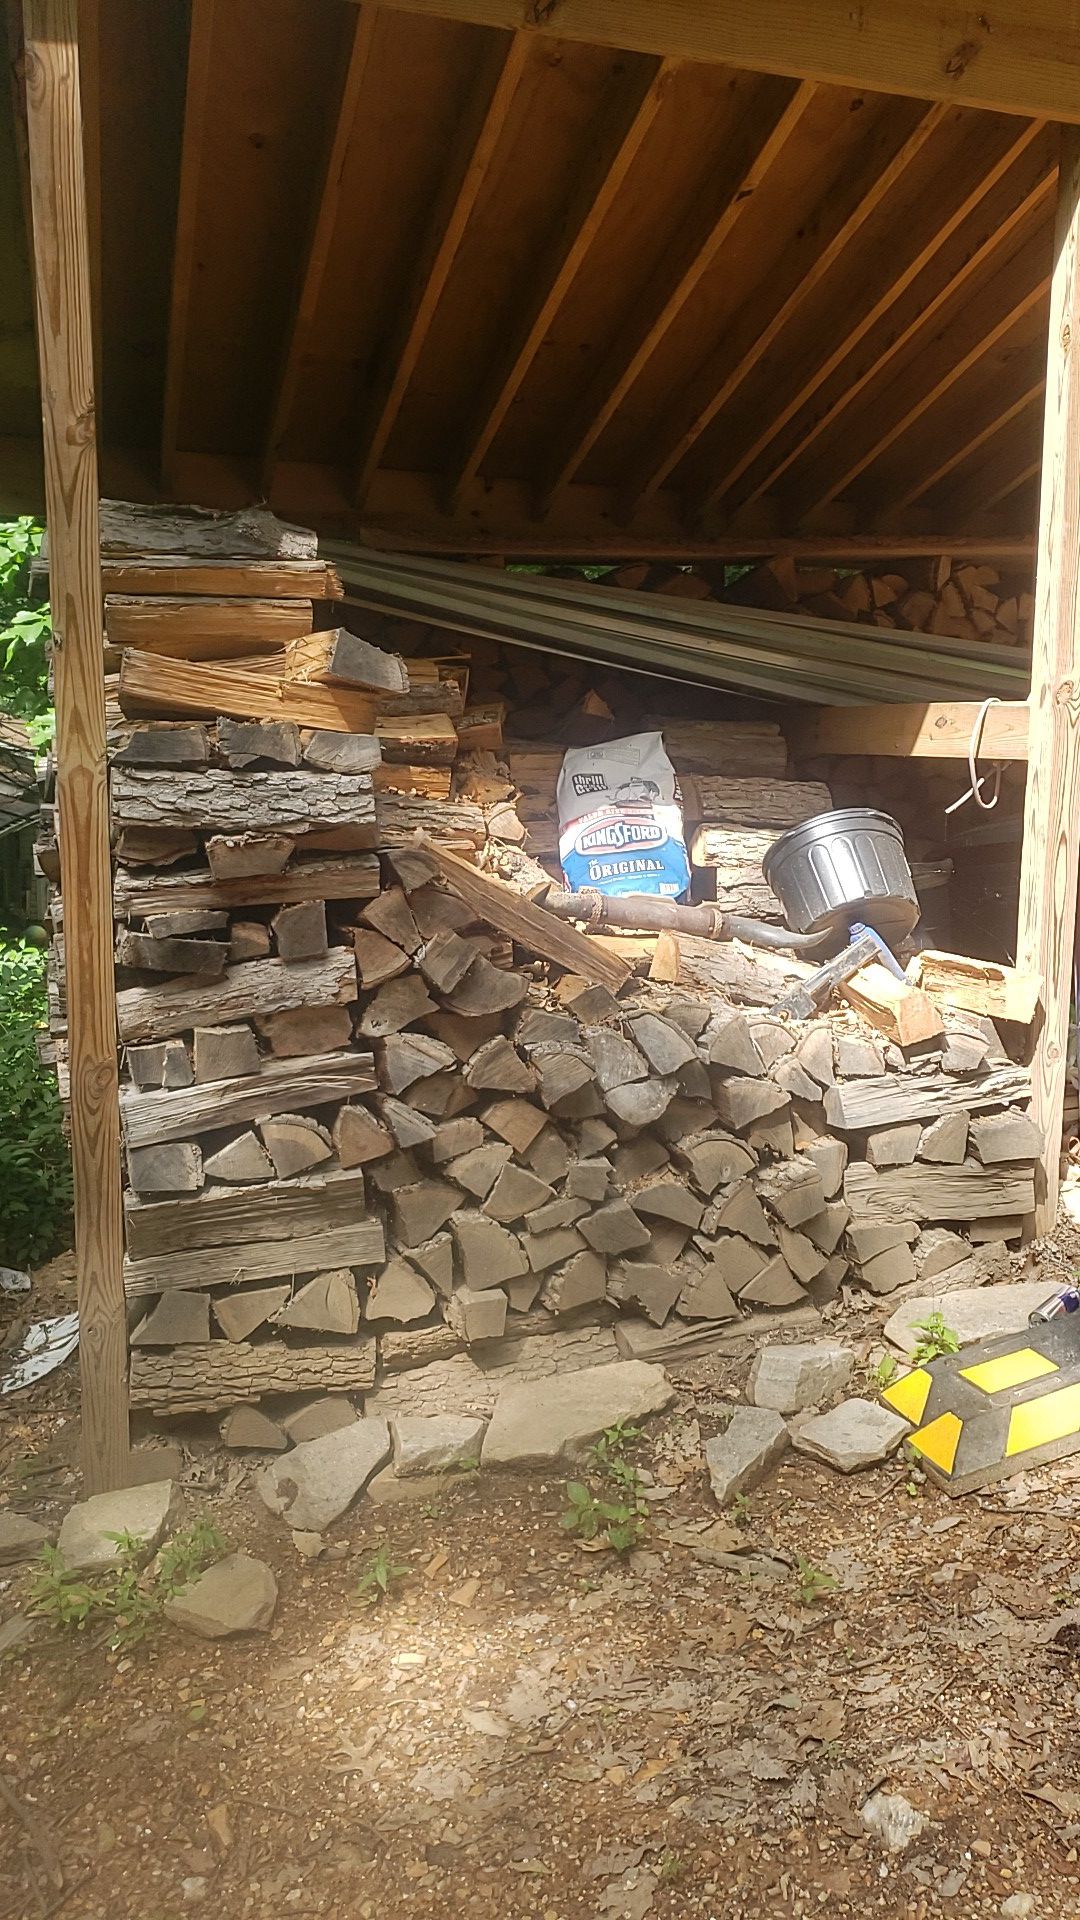 2 + cords of firewood 300.00